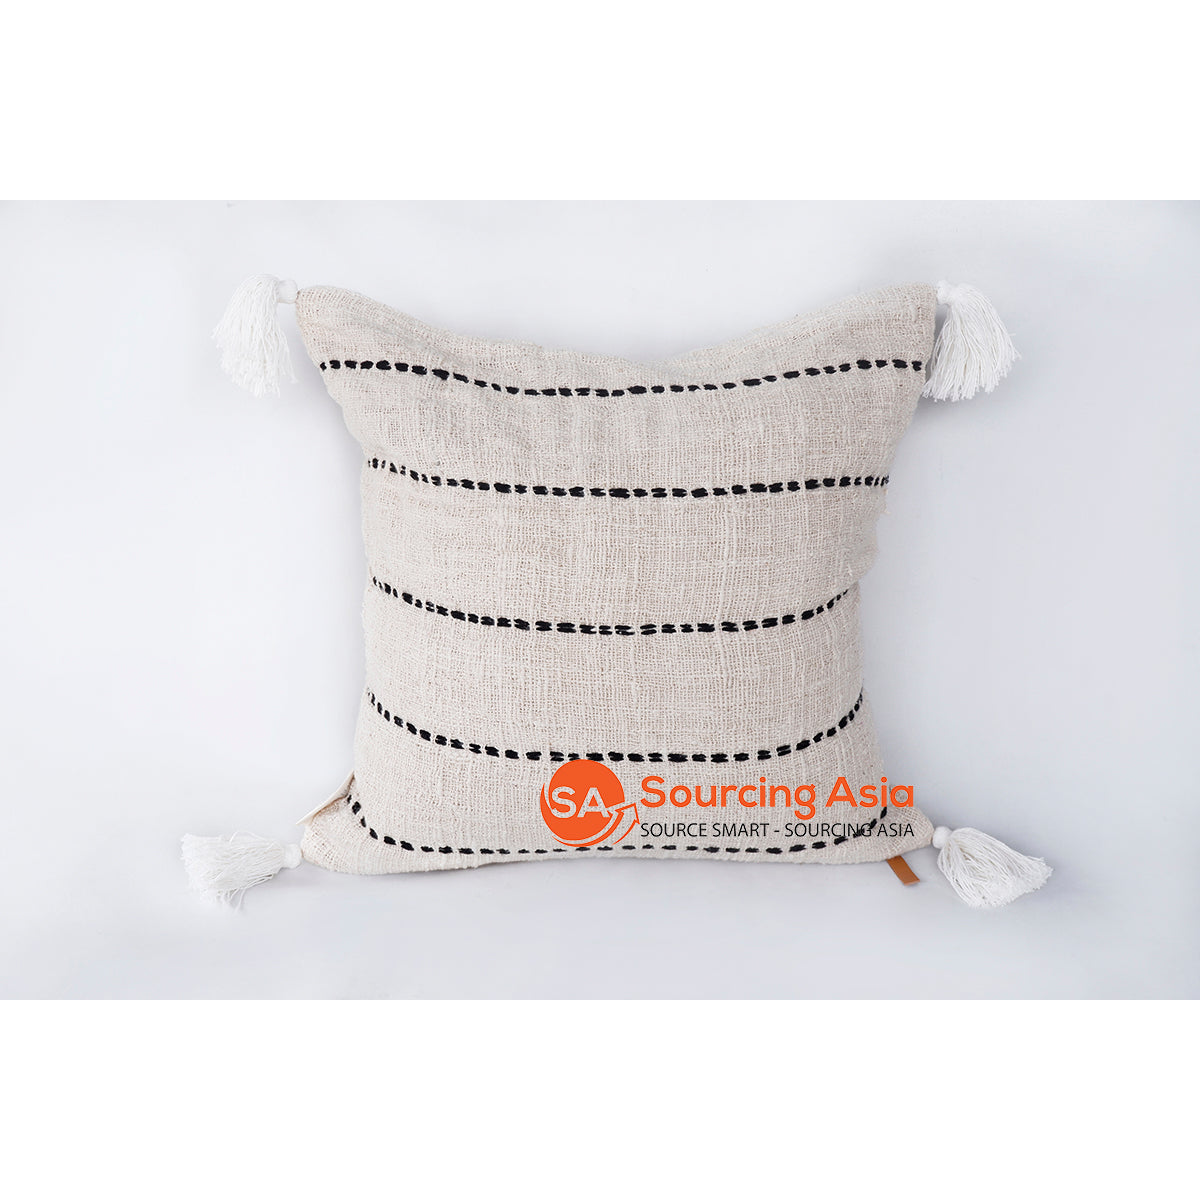 HIP031-4 NATURAL TUMANGGAL SQUARE COVER CUSHION 50X50CM WITH BLACK HAND-STITCHED AND TASSELS (PRICE WITHOUT INNER)